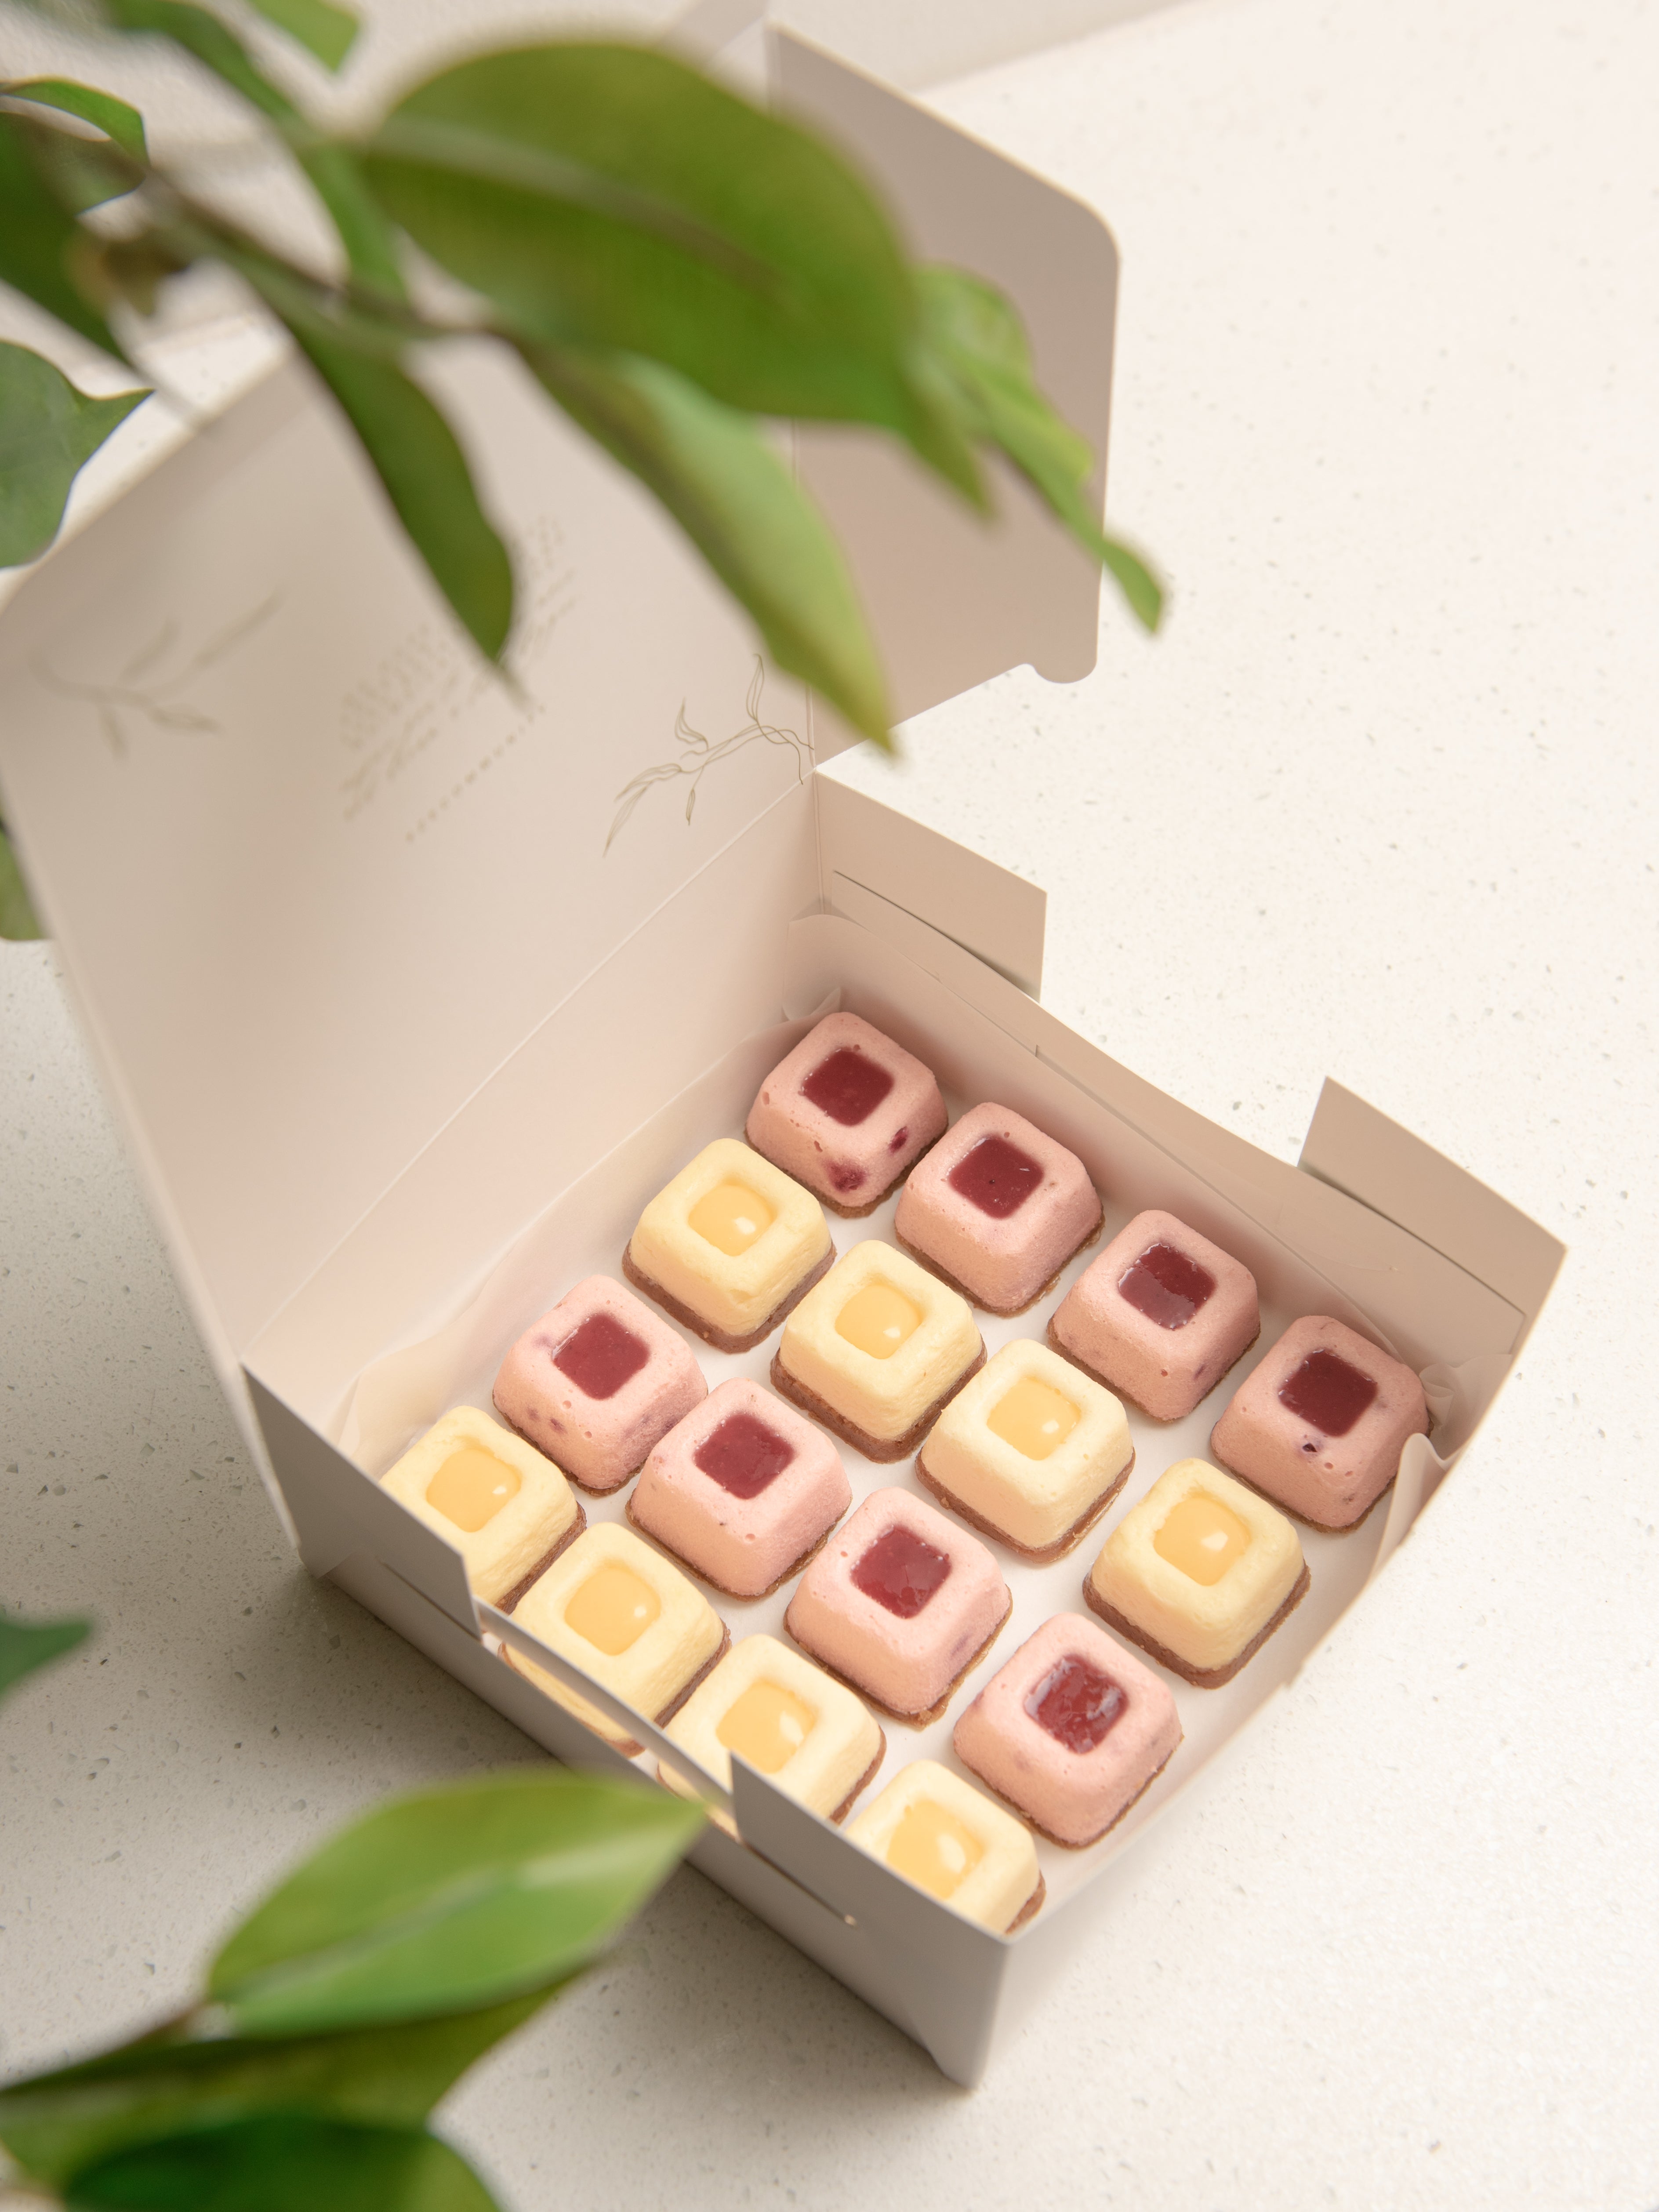 A 384x512 photo of a white paper box containing 16 cubes of Original and Raspberry flavoured mini cheesecakes arranged alternately with leaves on the foreground